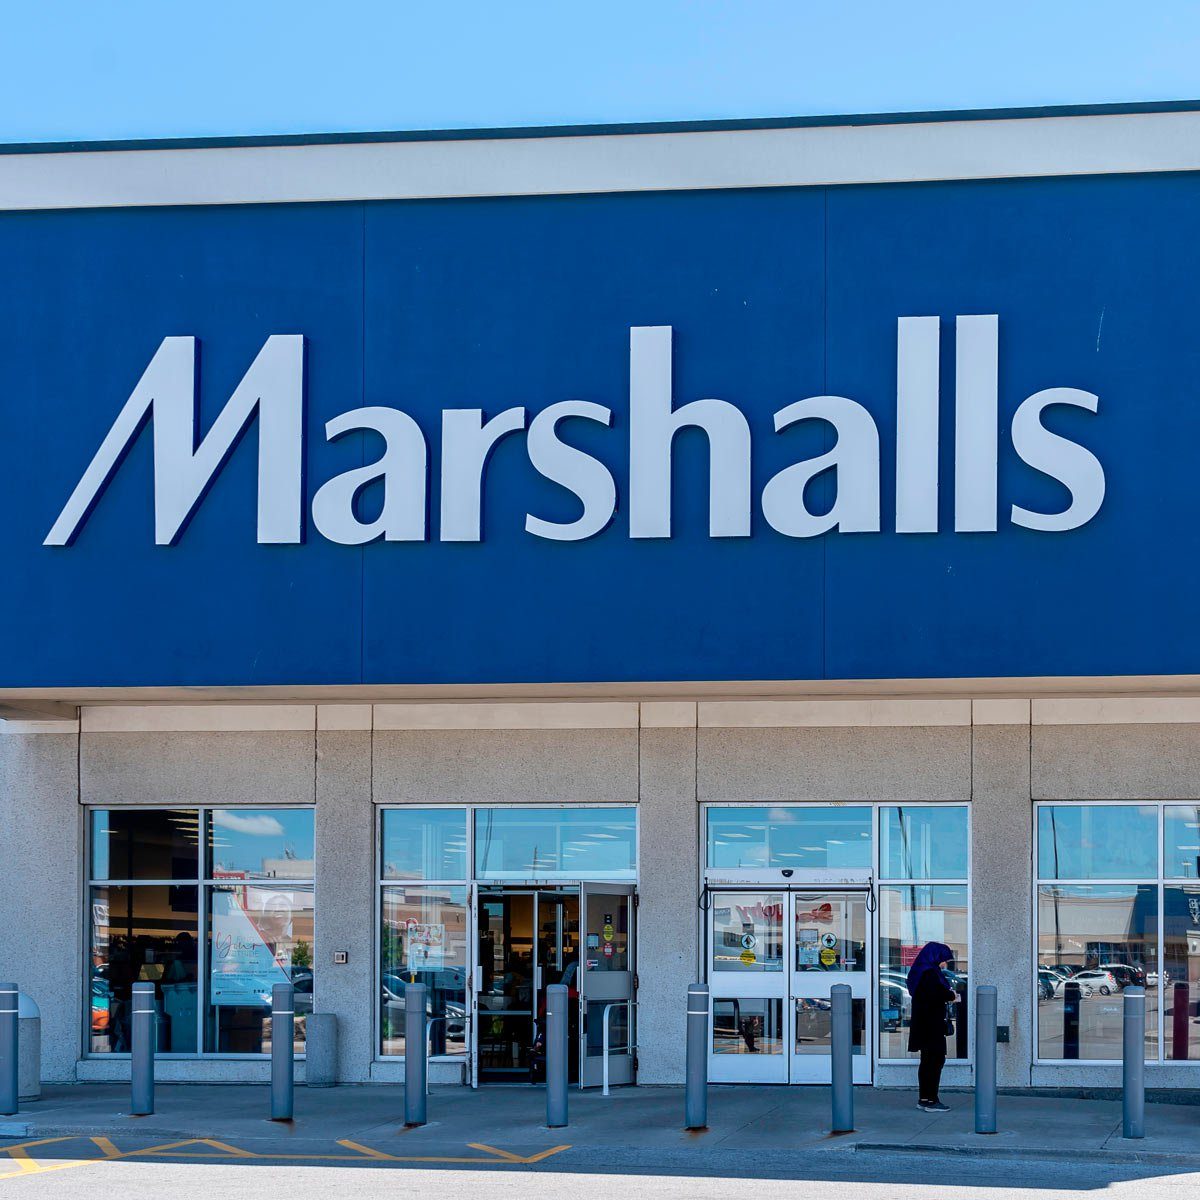 Marshalls Just Launched Their Online Store | Taste of Home